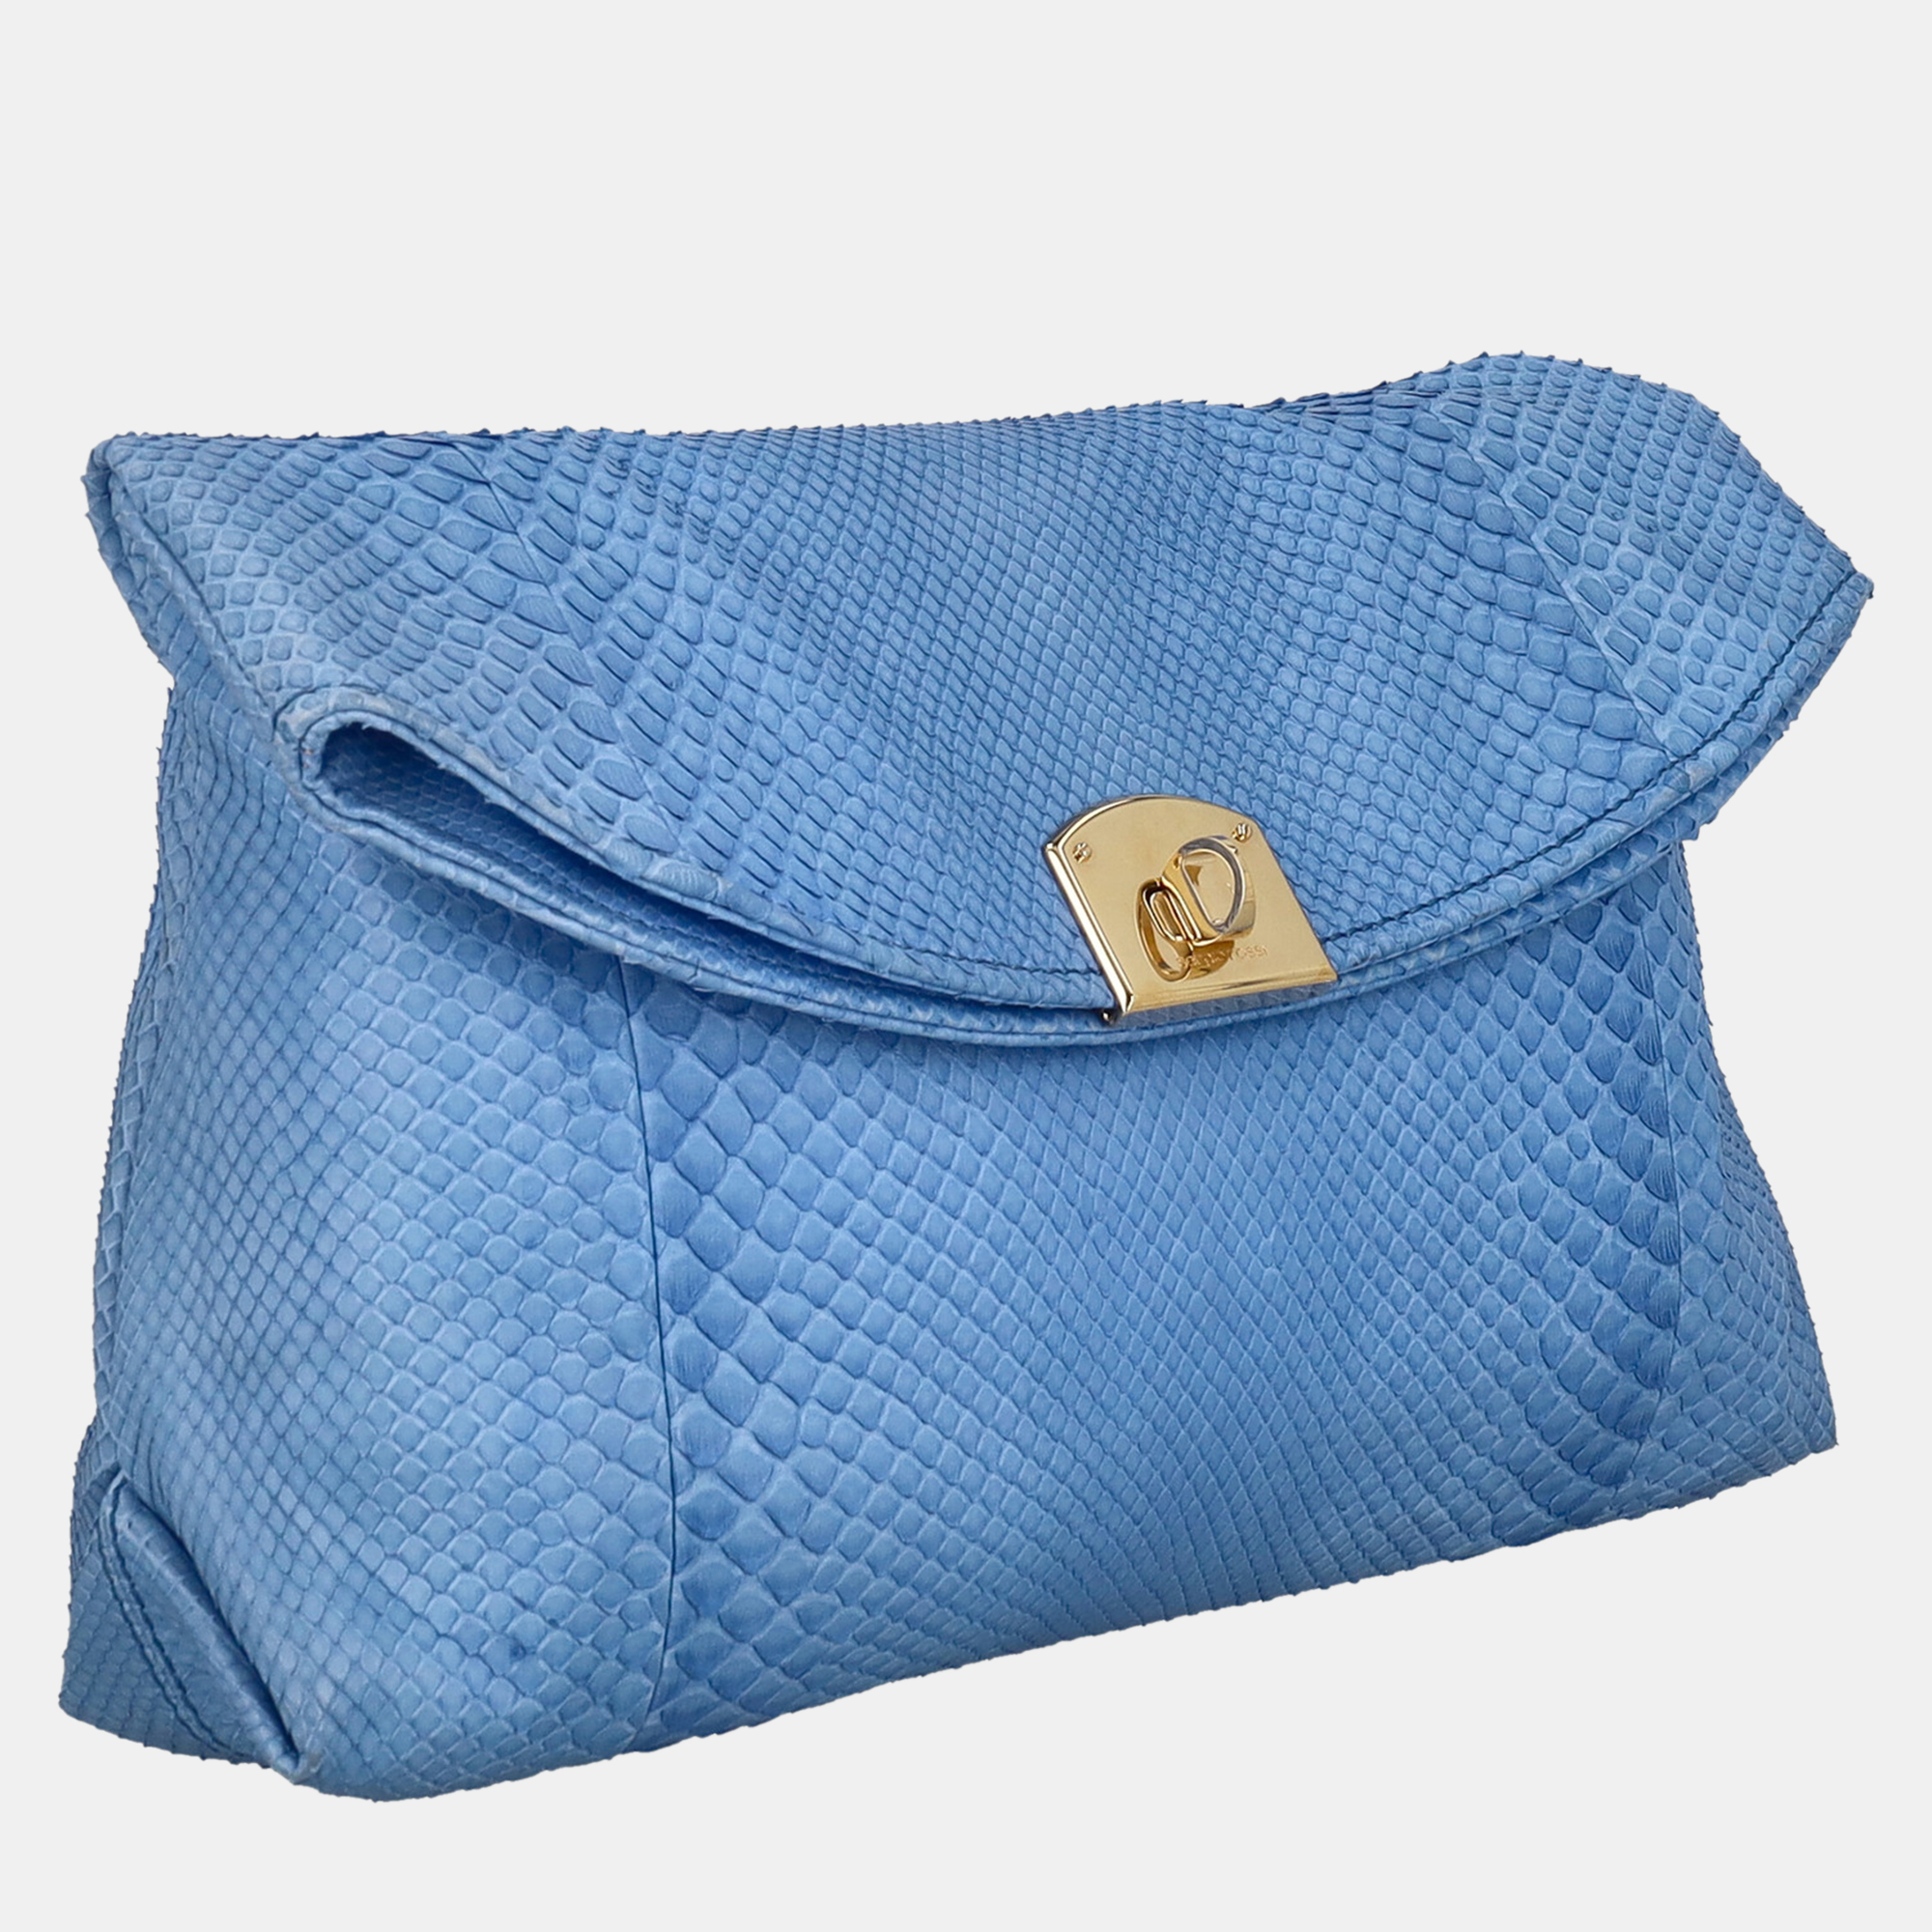 Sergio Rossi  Women's Exotic Skin Leather Clutch Bag - Blue - One Size